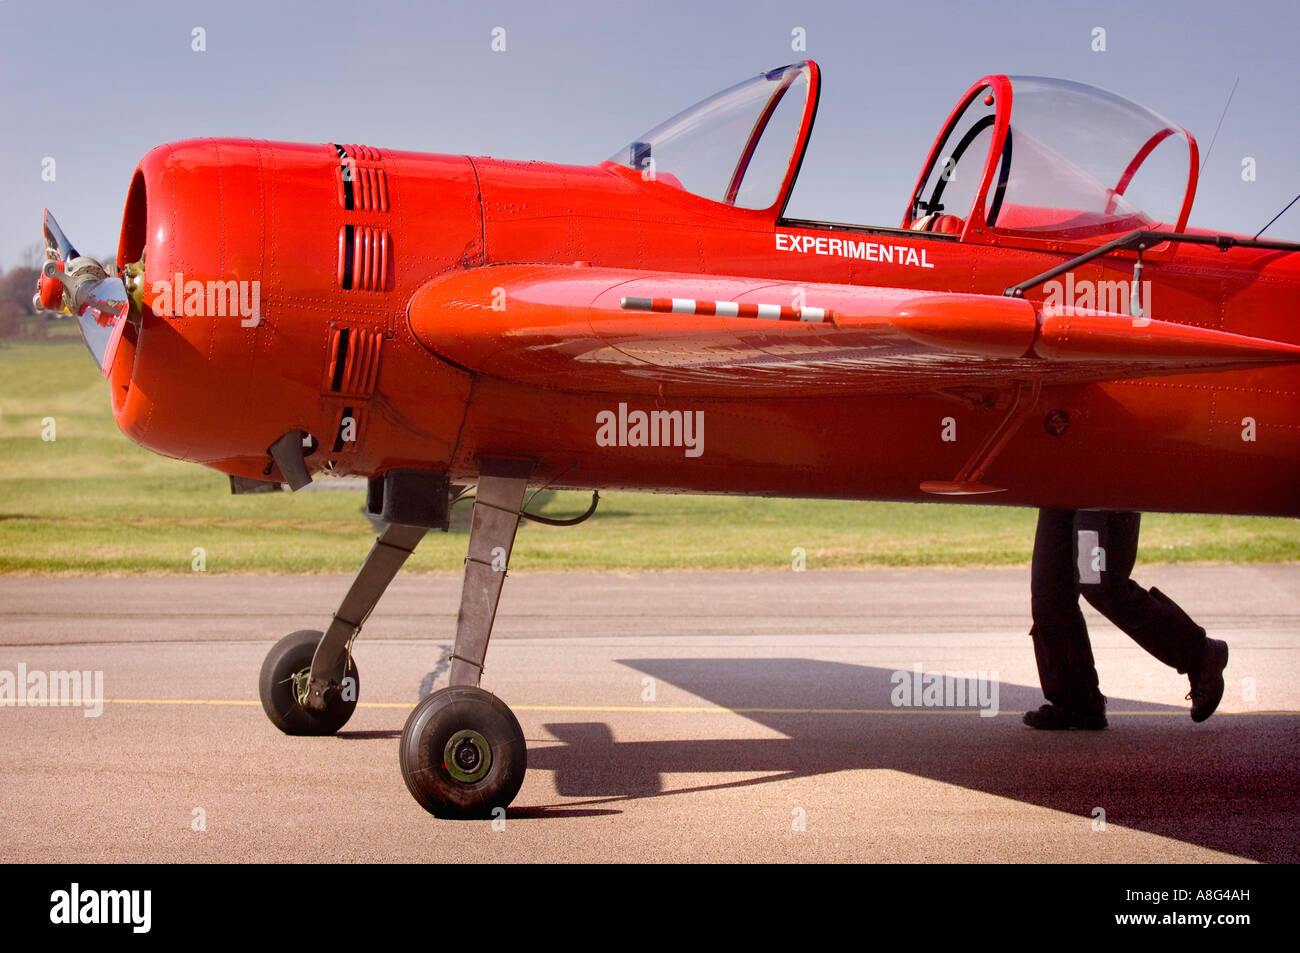 Wingnut: A bright red plane appears to have legs, as a pilot pushes his aircraft named 'Experimental' on a runway at Shoreham Airport, West Sussex, UK Stock Photo